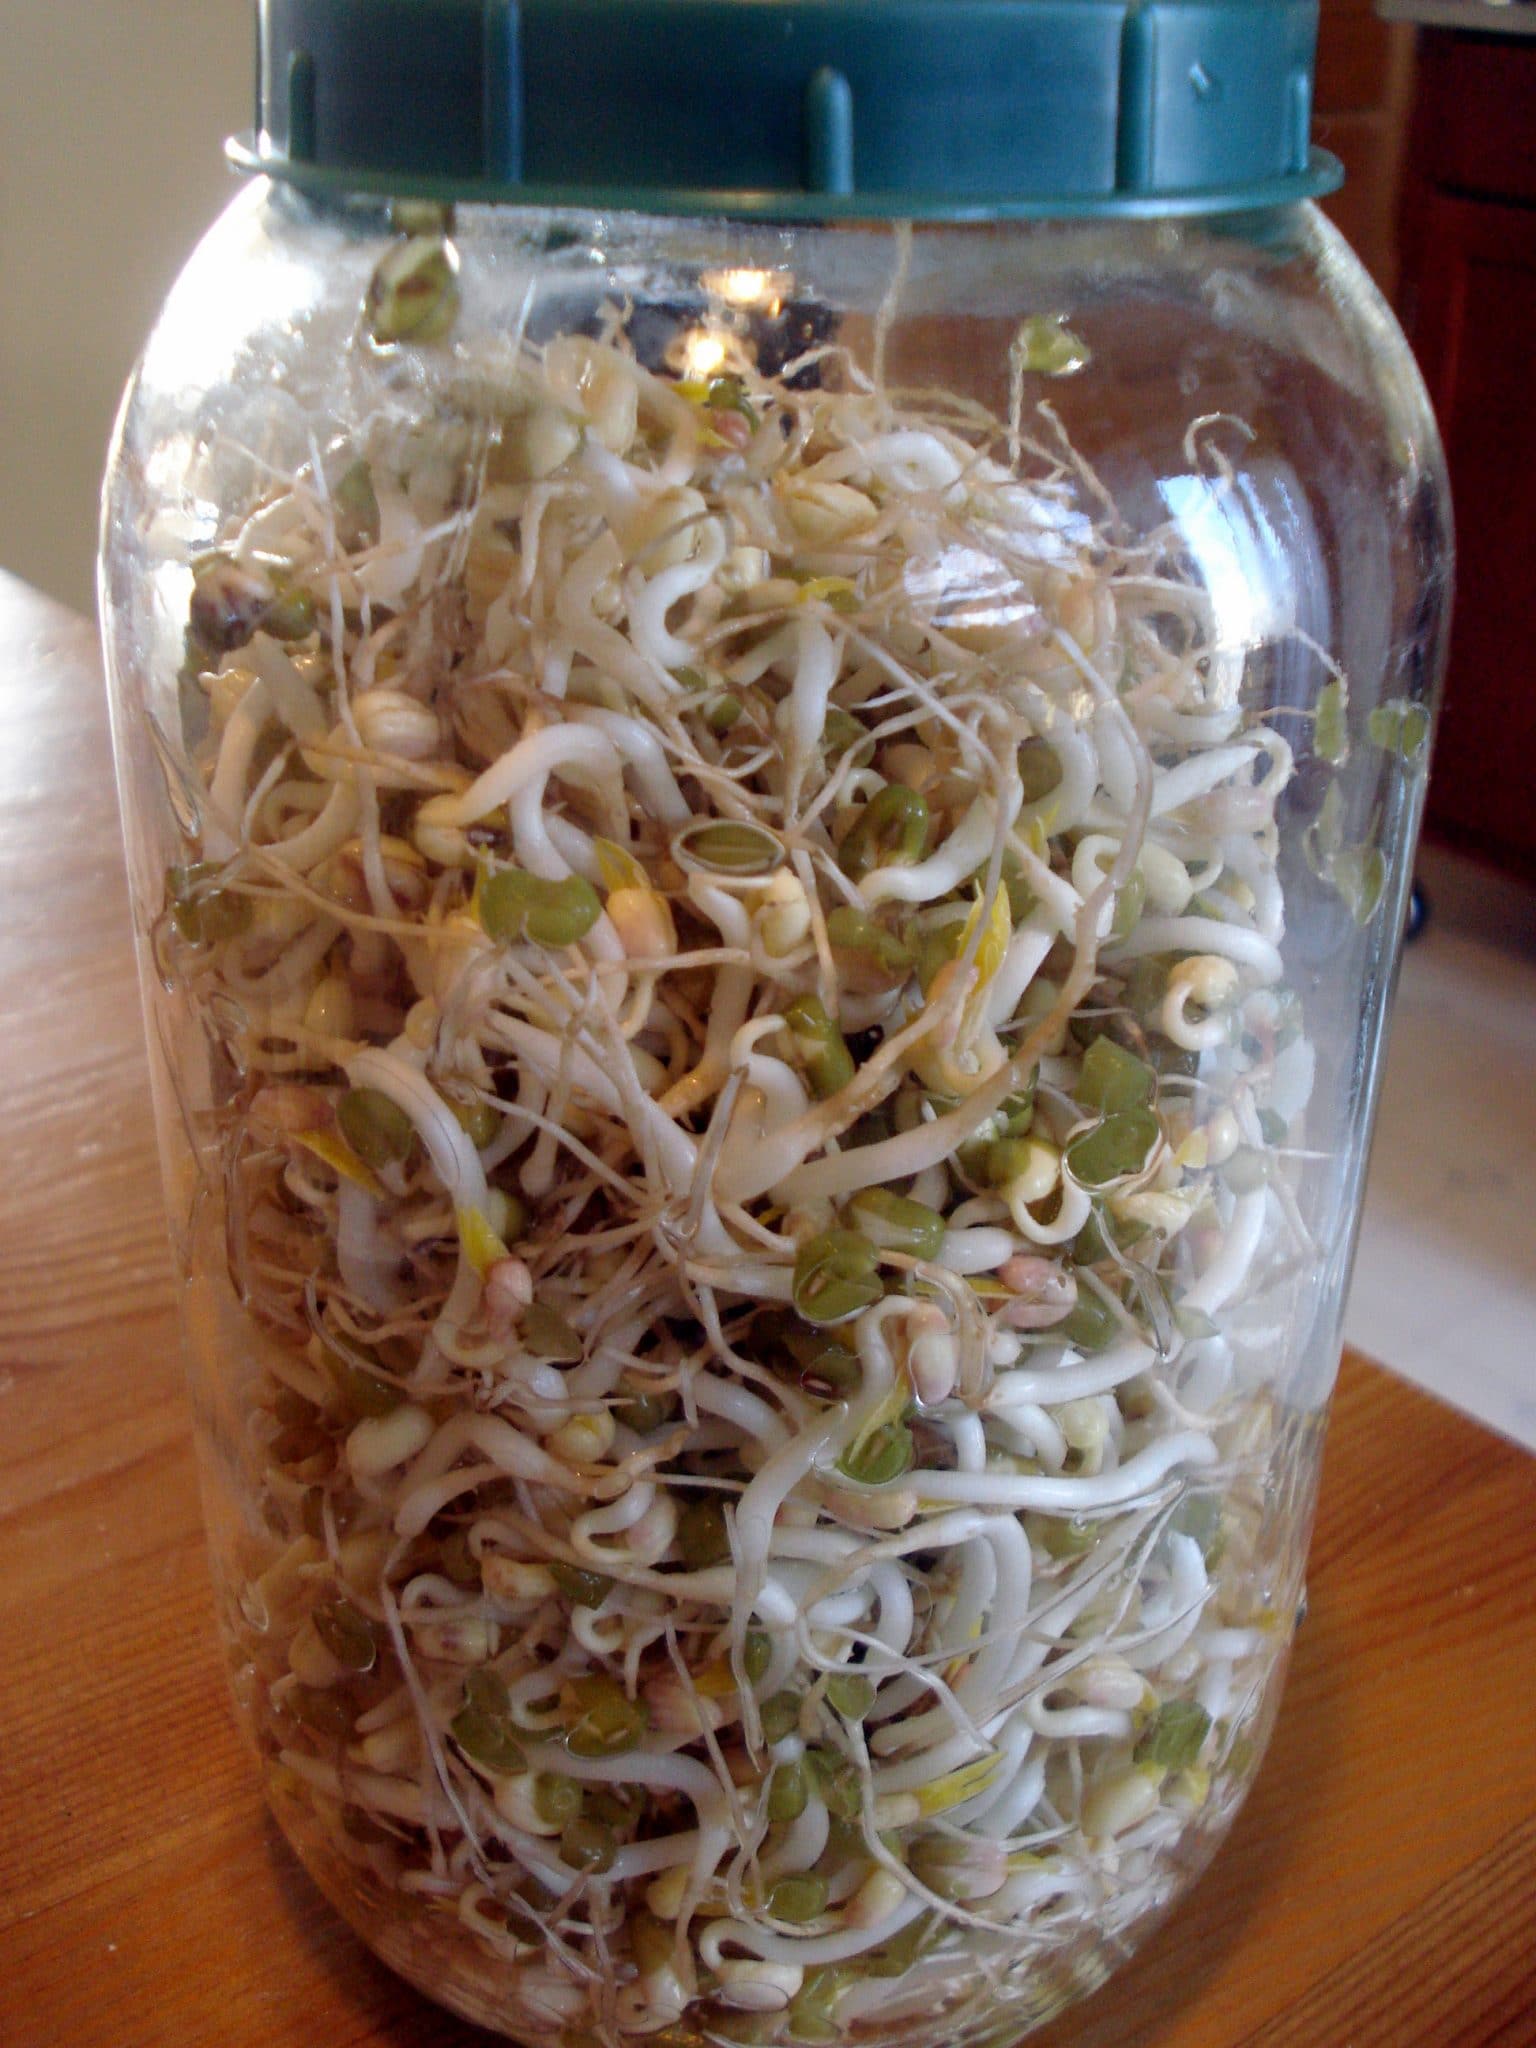 Sprouted Mung beans